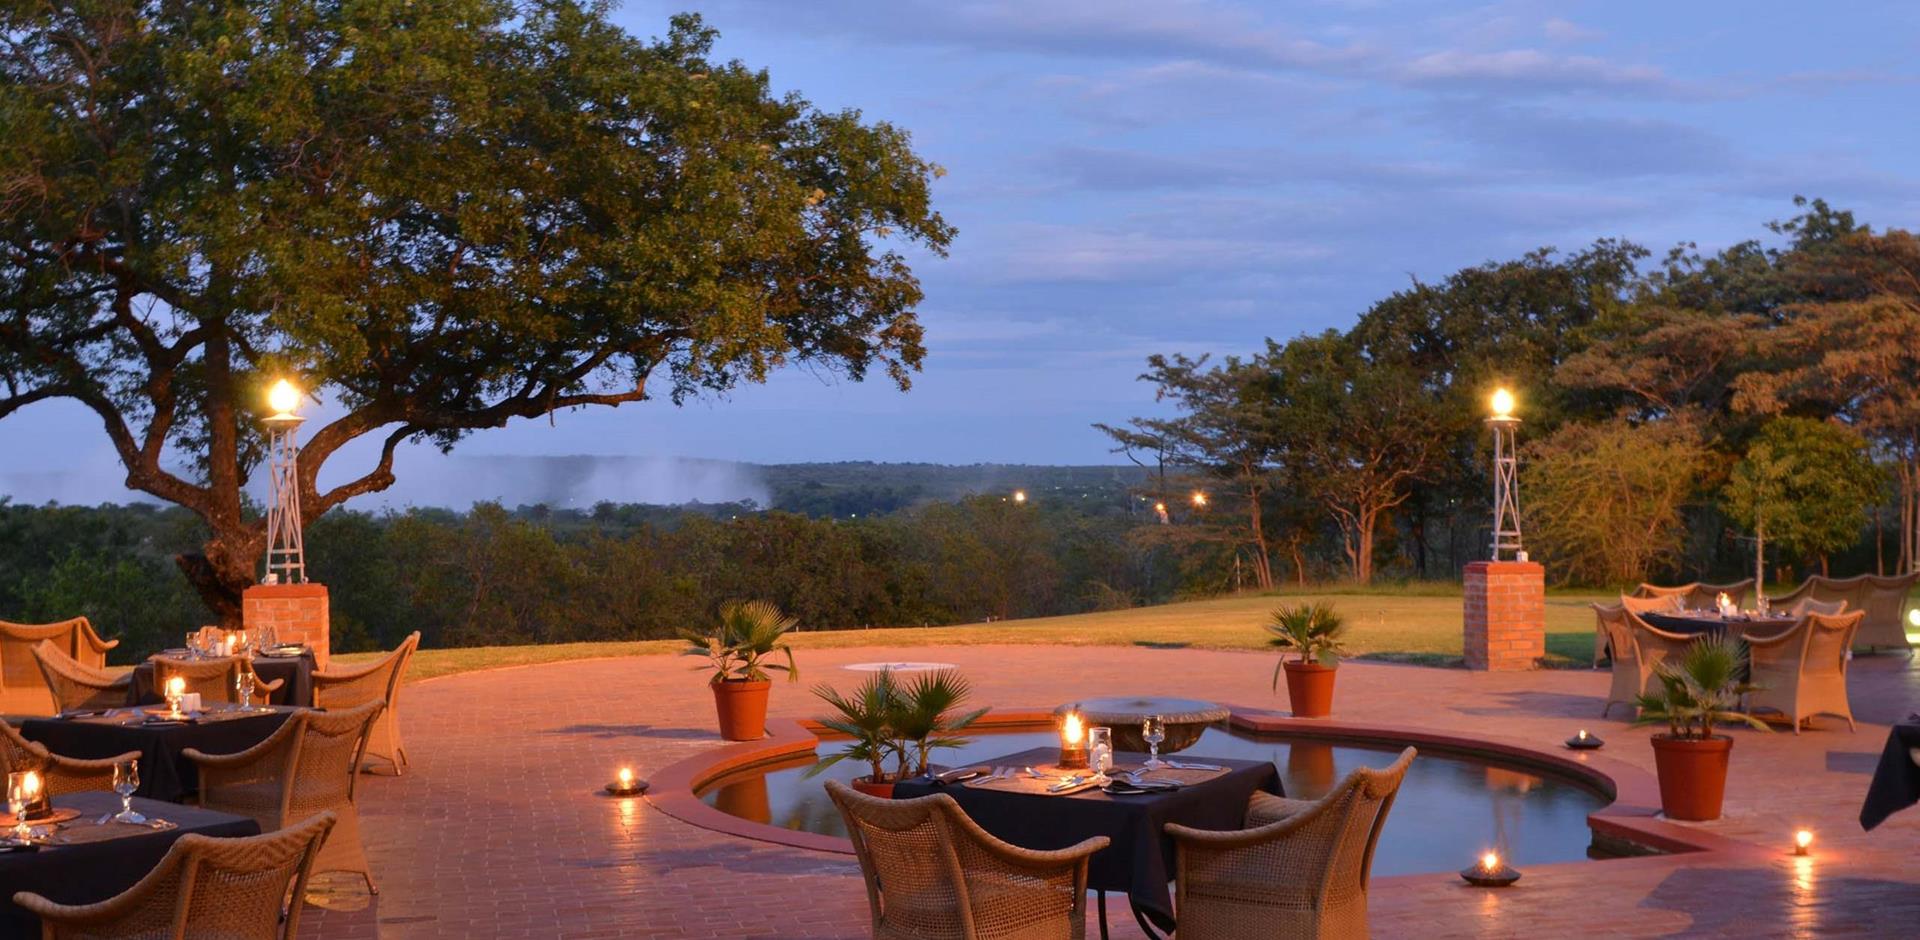 Outdoor dining, The Victoria Falls Hotel, Zimbabwe, A&K